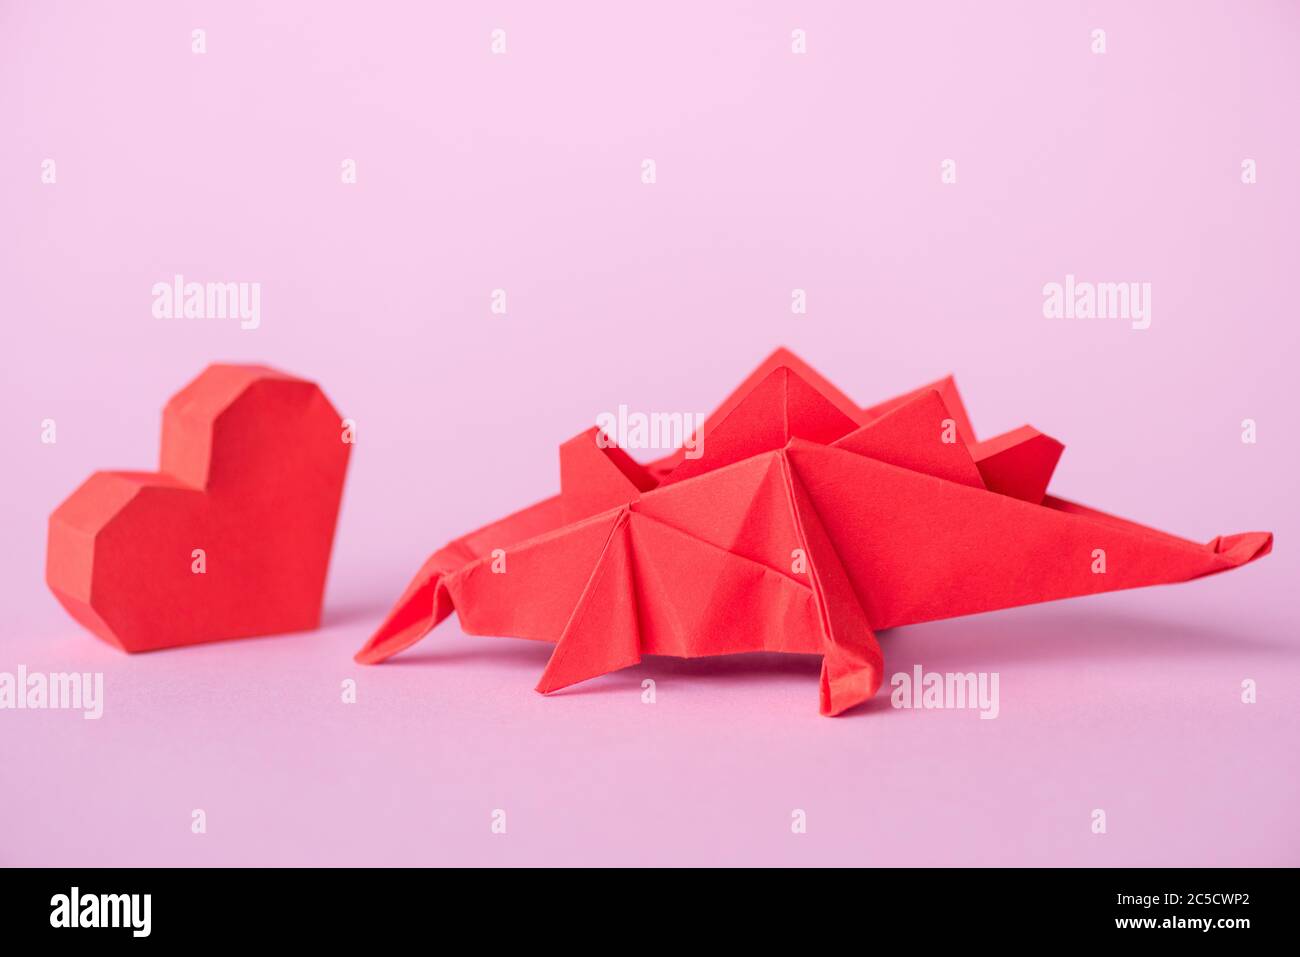 red paper heart near origami dinosaur on pink Stock Photo